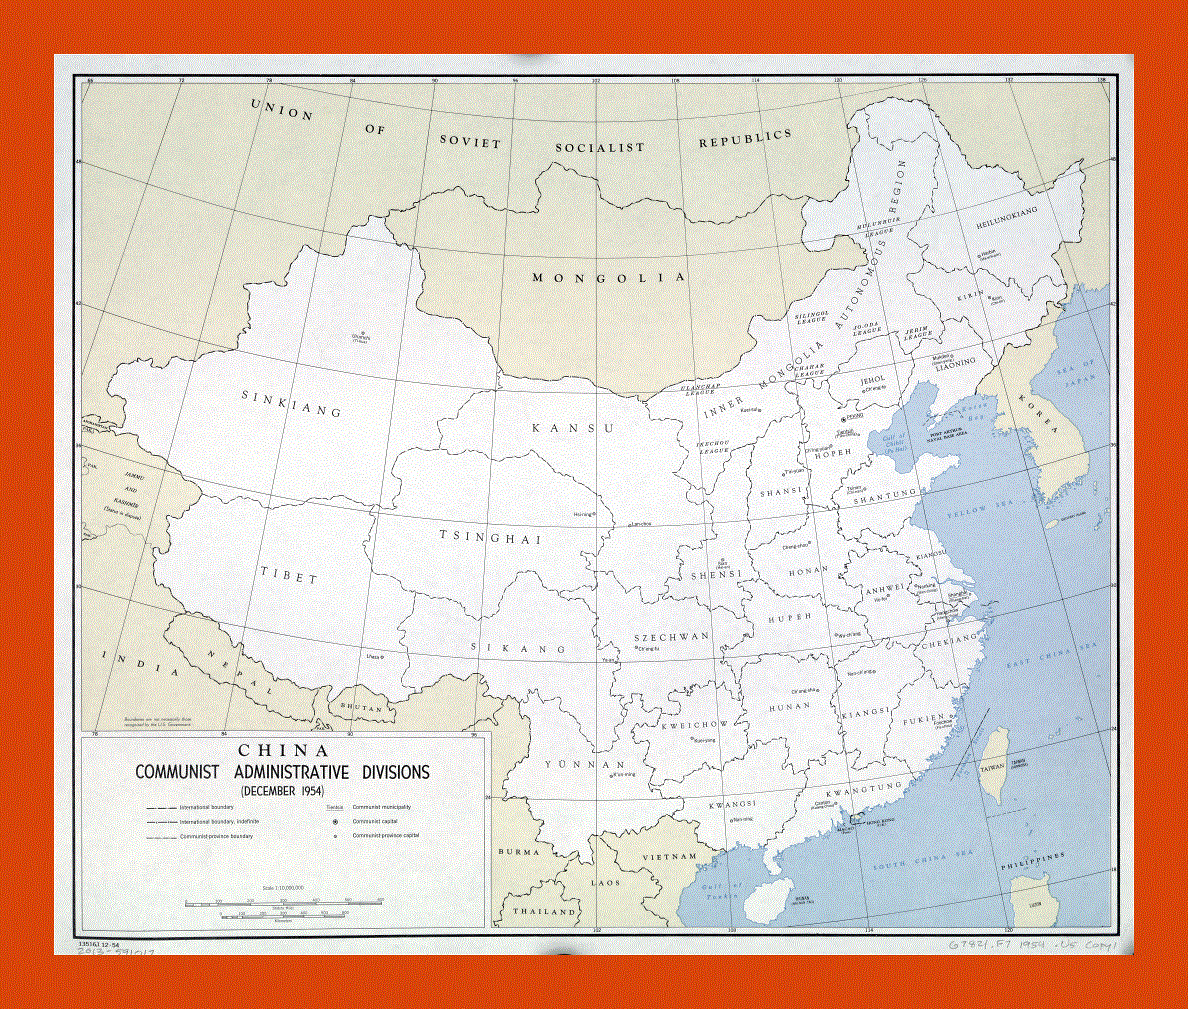 Administrative divisions map of Communist China - 1954